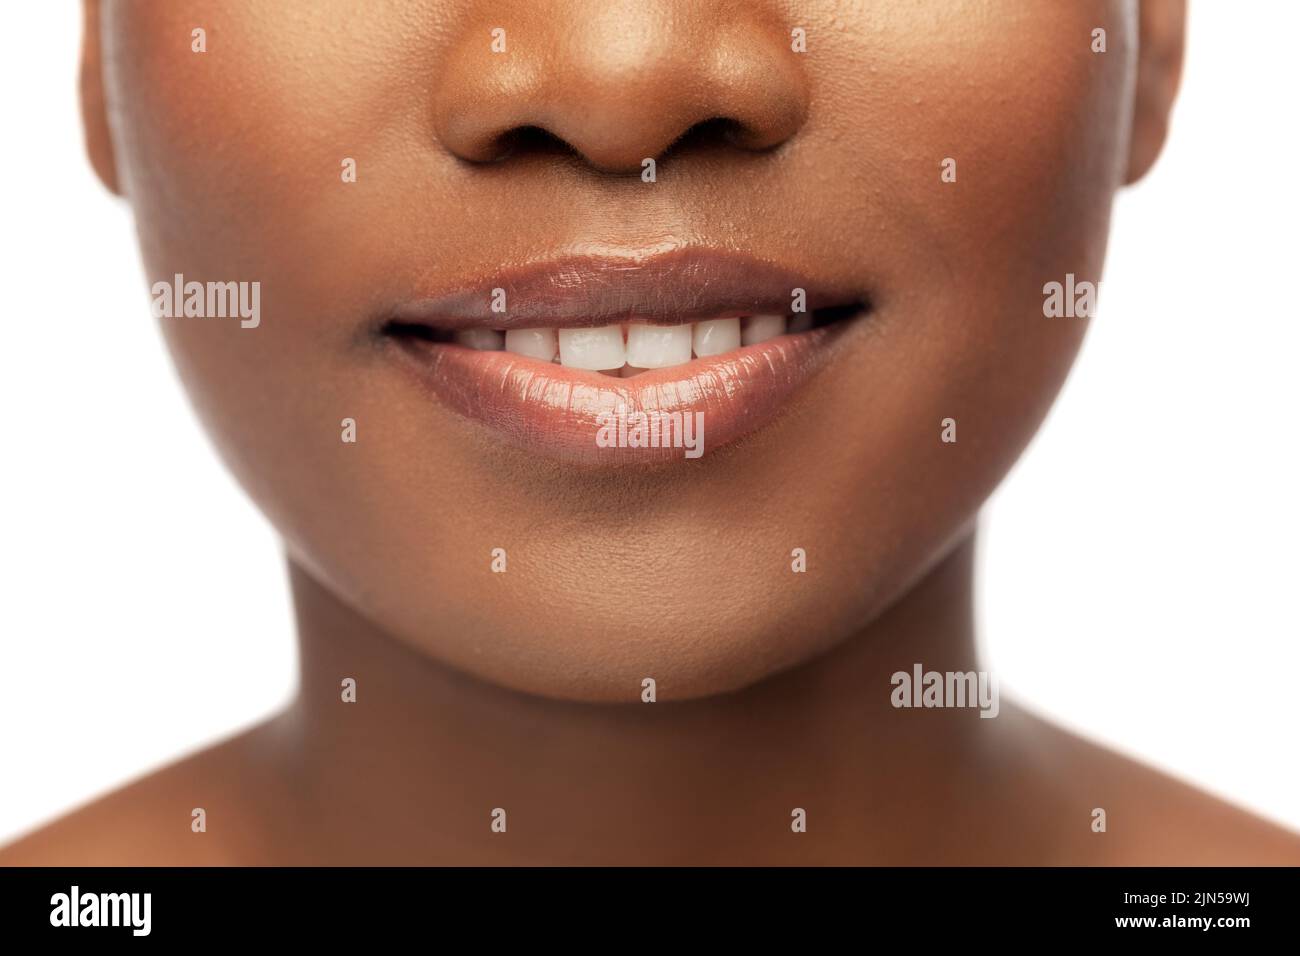 close up of face of smiling african american woman Stock Photo